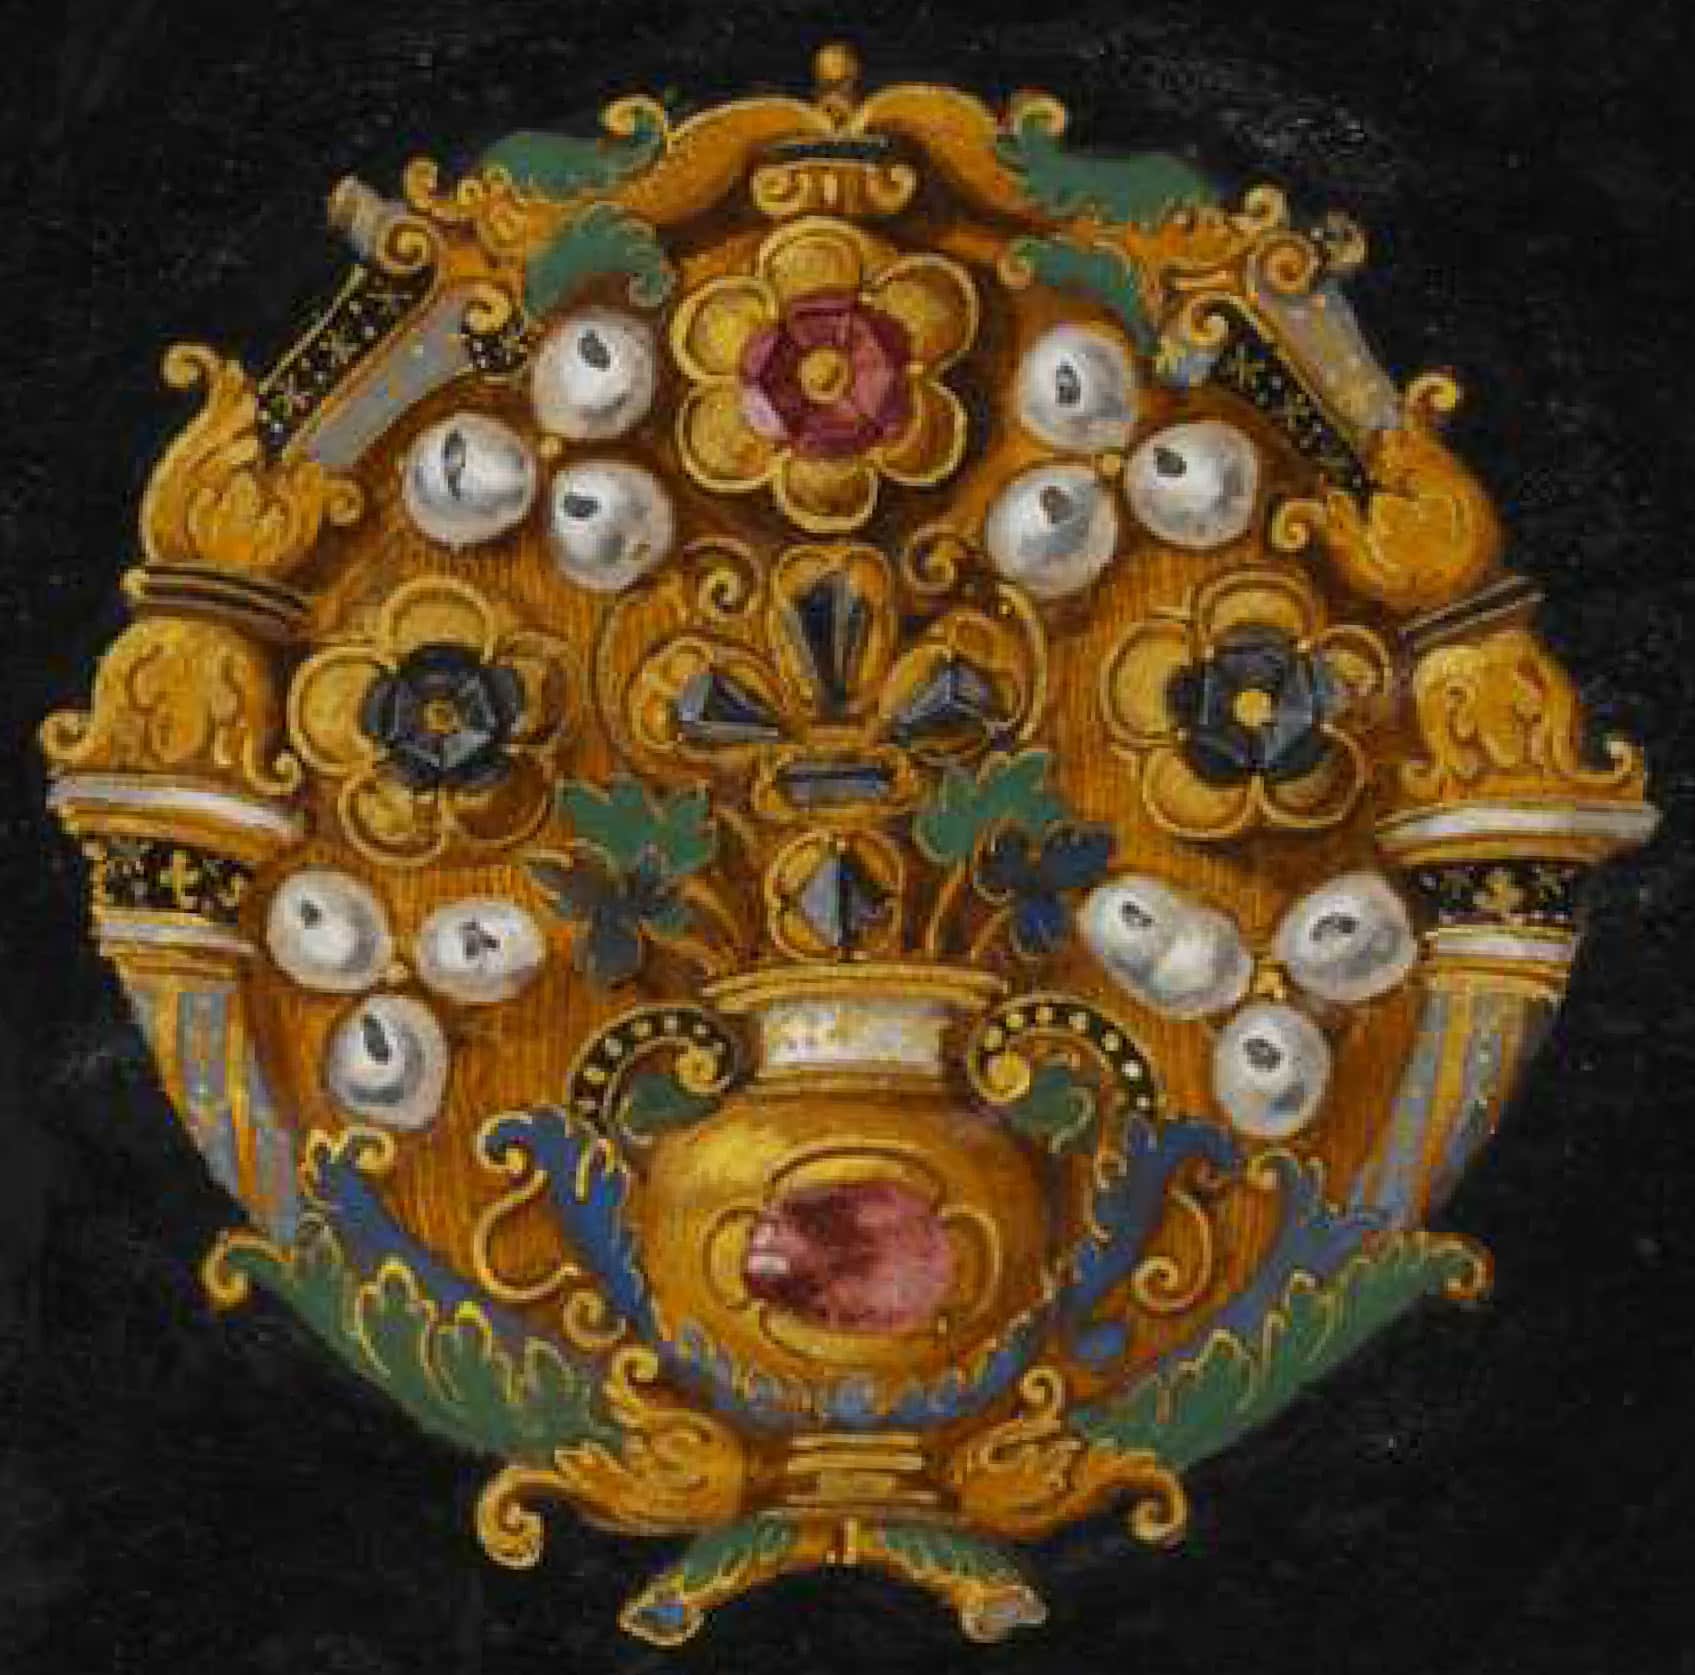 A Rosette Set Jewel. Oil on Canvas by Hans Mielich. From das Kleinodienbuch in the Bavarian State Library.